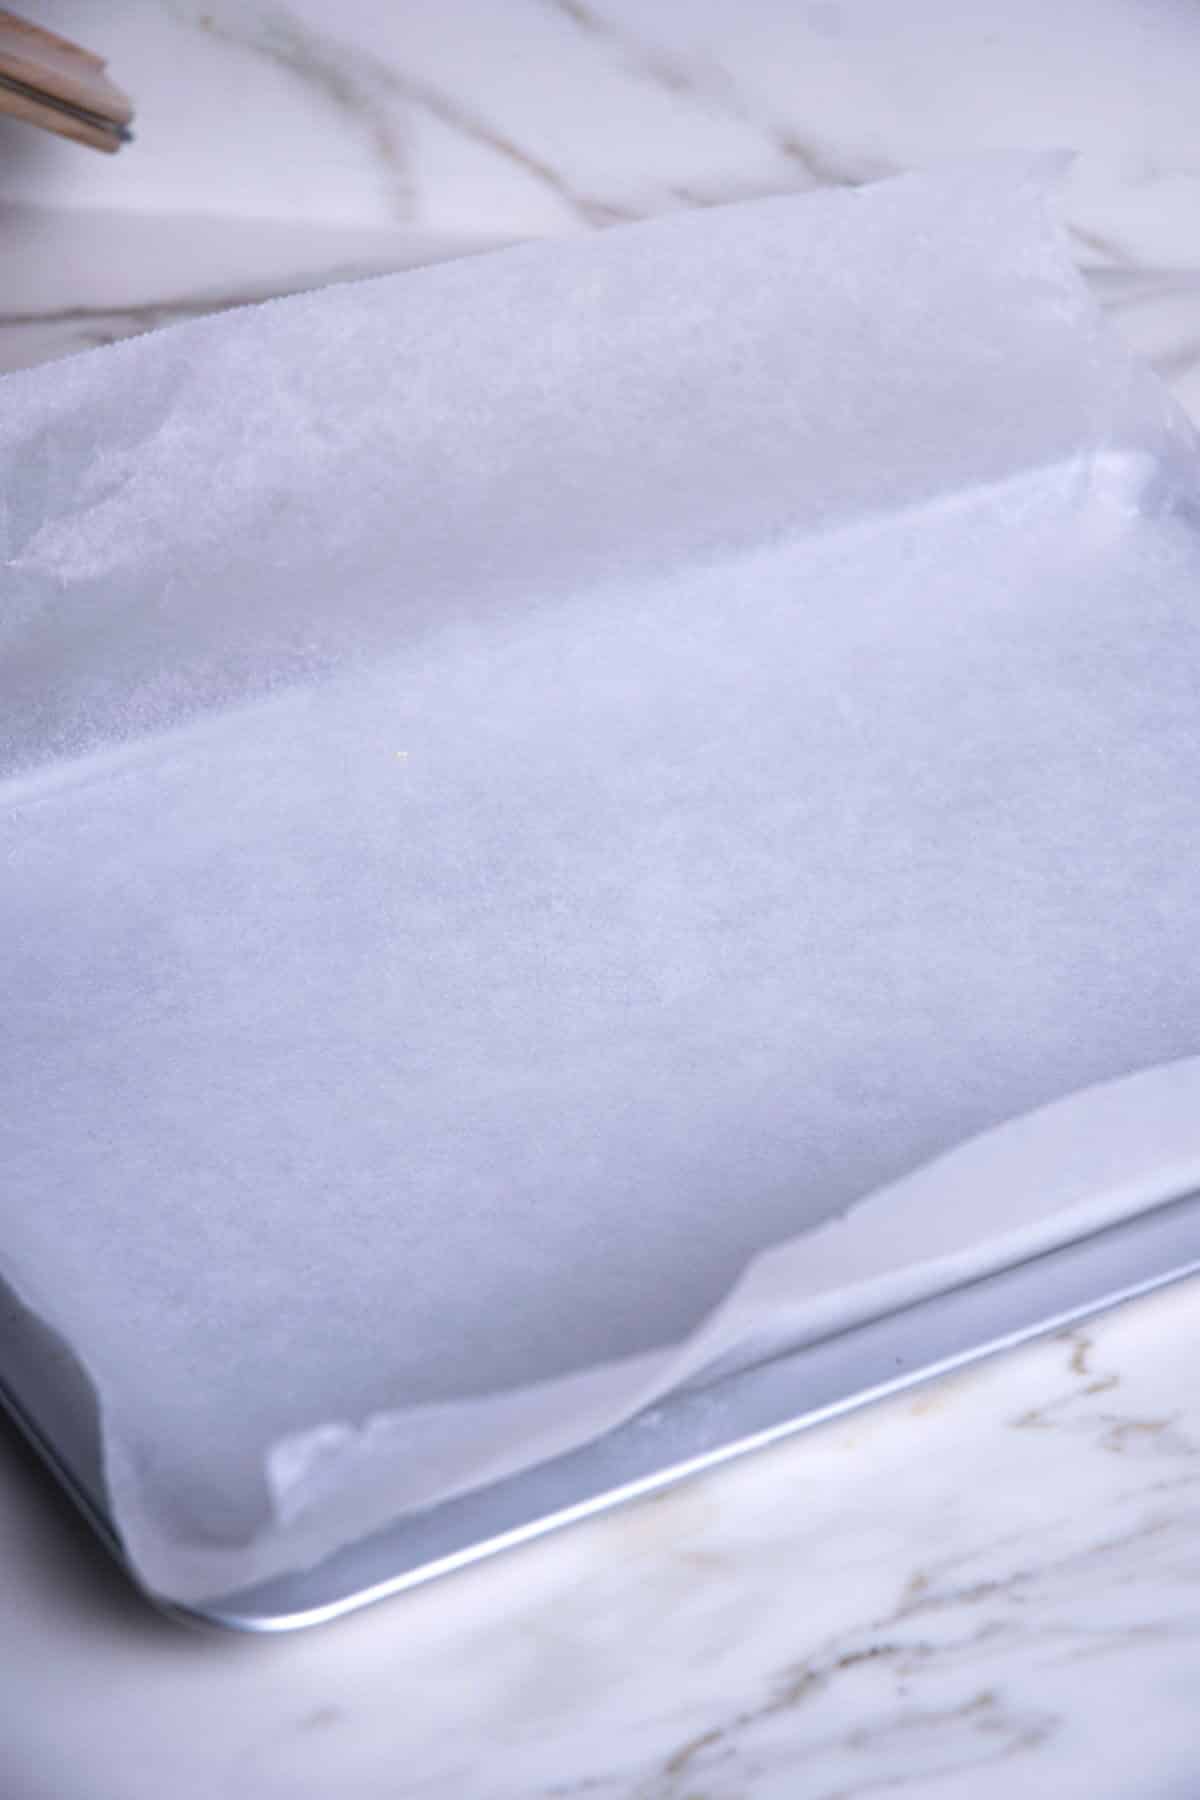 Baking sheet with parchment paper.